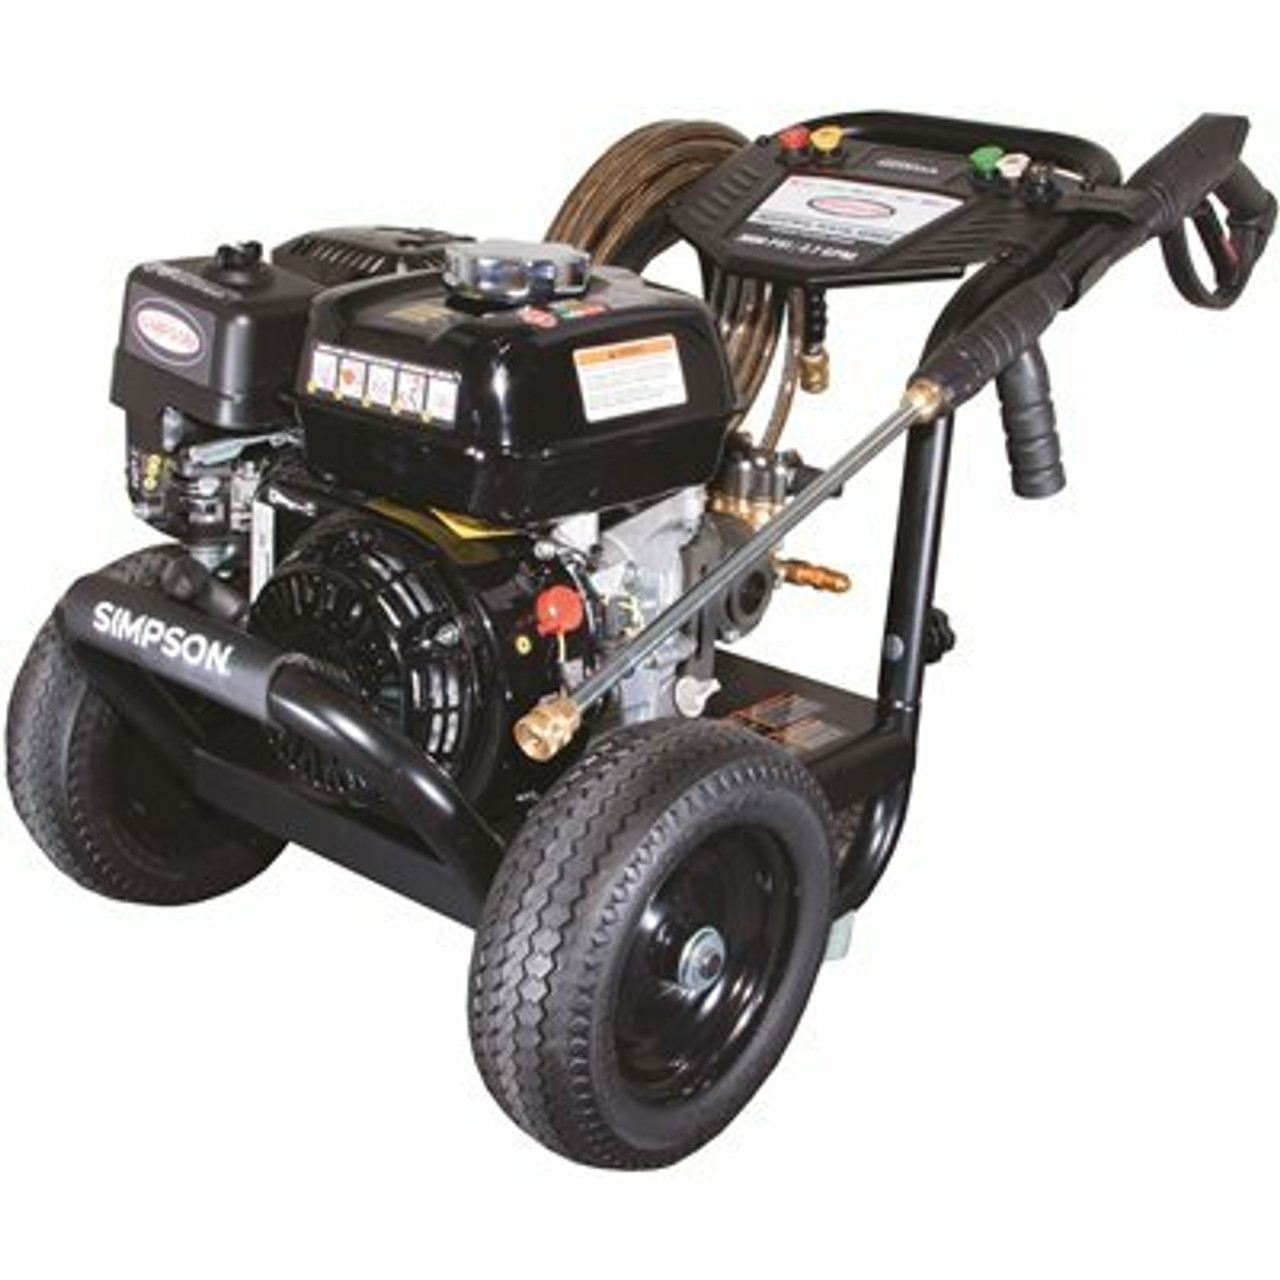 Industrial Series Is61022 3000 Psi At 2.7 Gpm Honda Gx200 With Aaa Ax300 Axial Cam Pump Cold Water Gas Pressure Washer